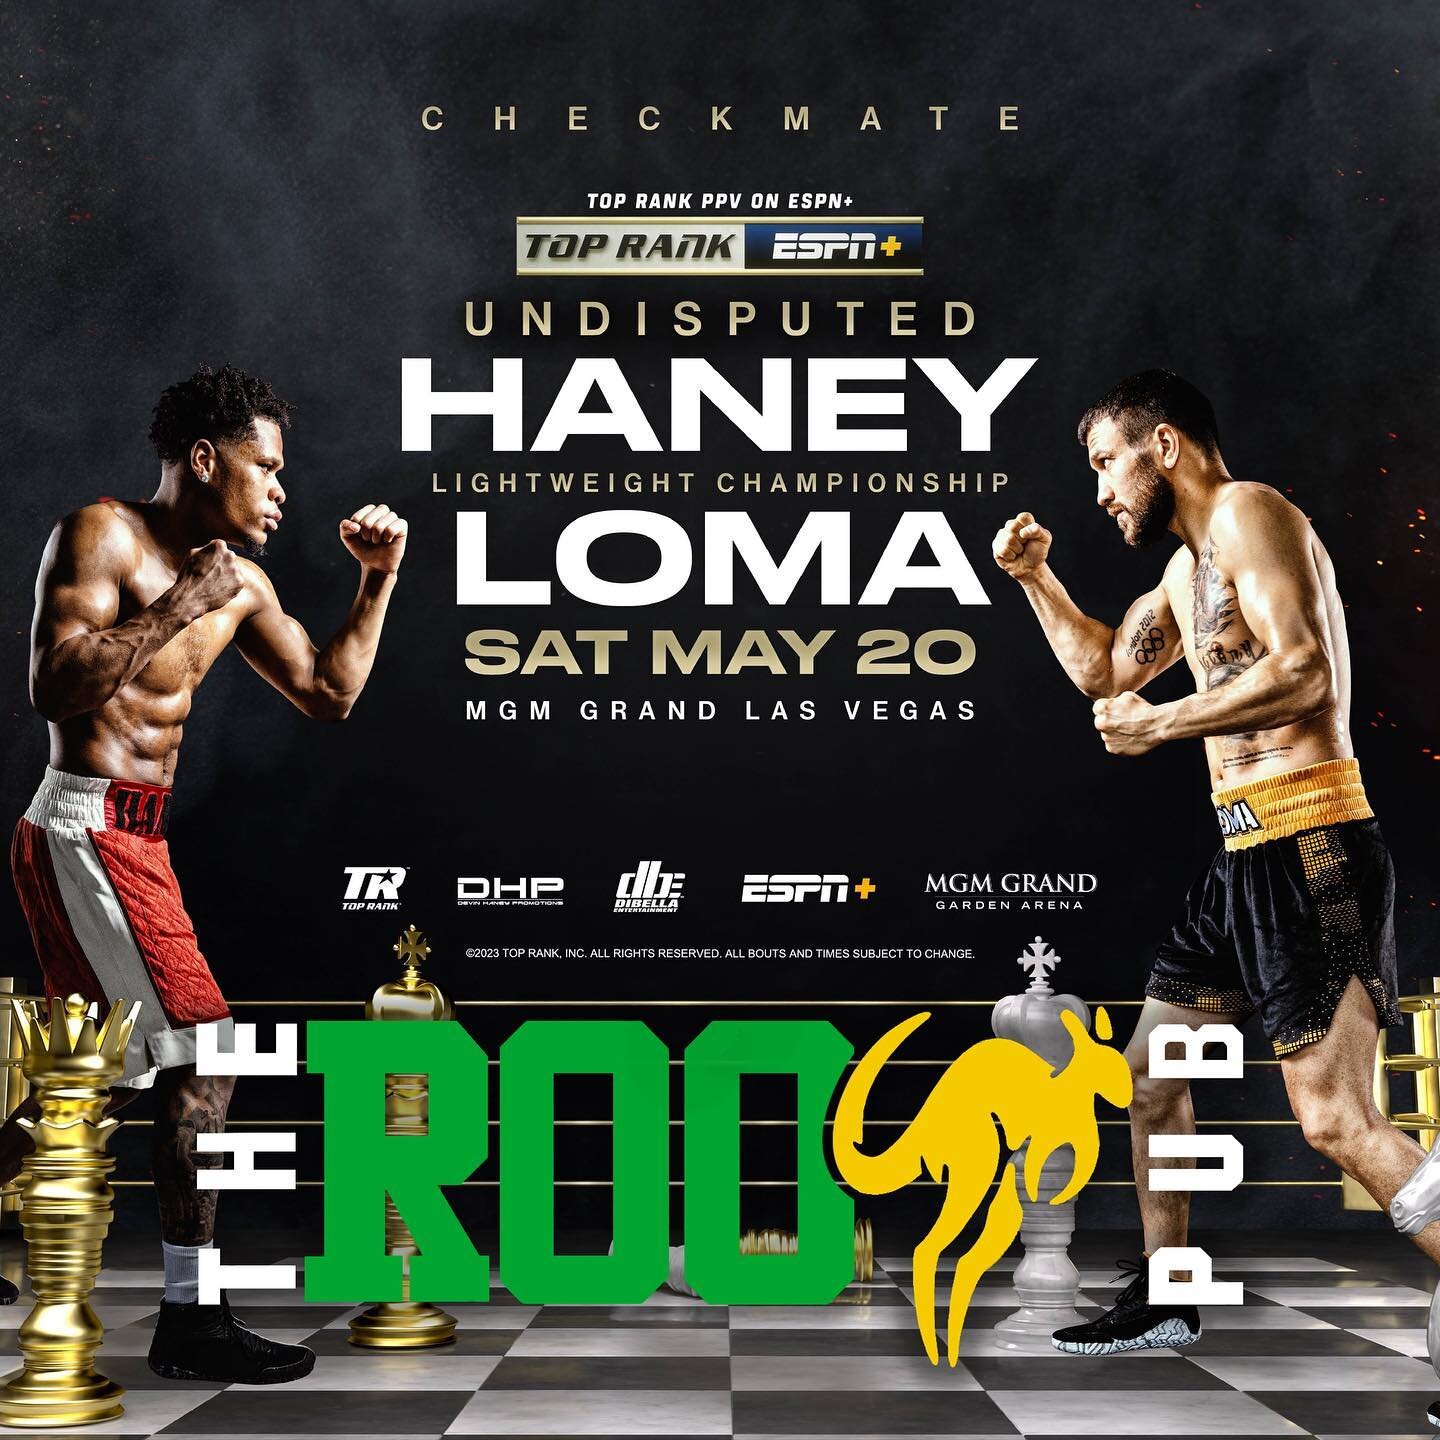 Join us at The Roo Pub this Saturday for an epic boxing showdown! Haney Vs Loma! 🥊🍻 Grab your friends, grab a drink, and witness the action on our big screens! Don't miss this thrilling match! 🎉
#TheRooPub #Boxing SportsBar